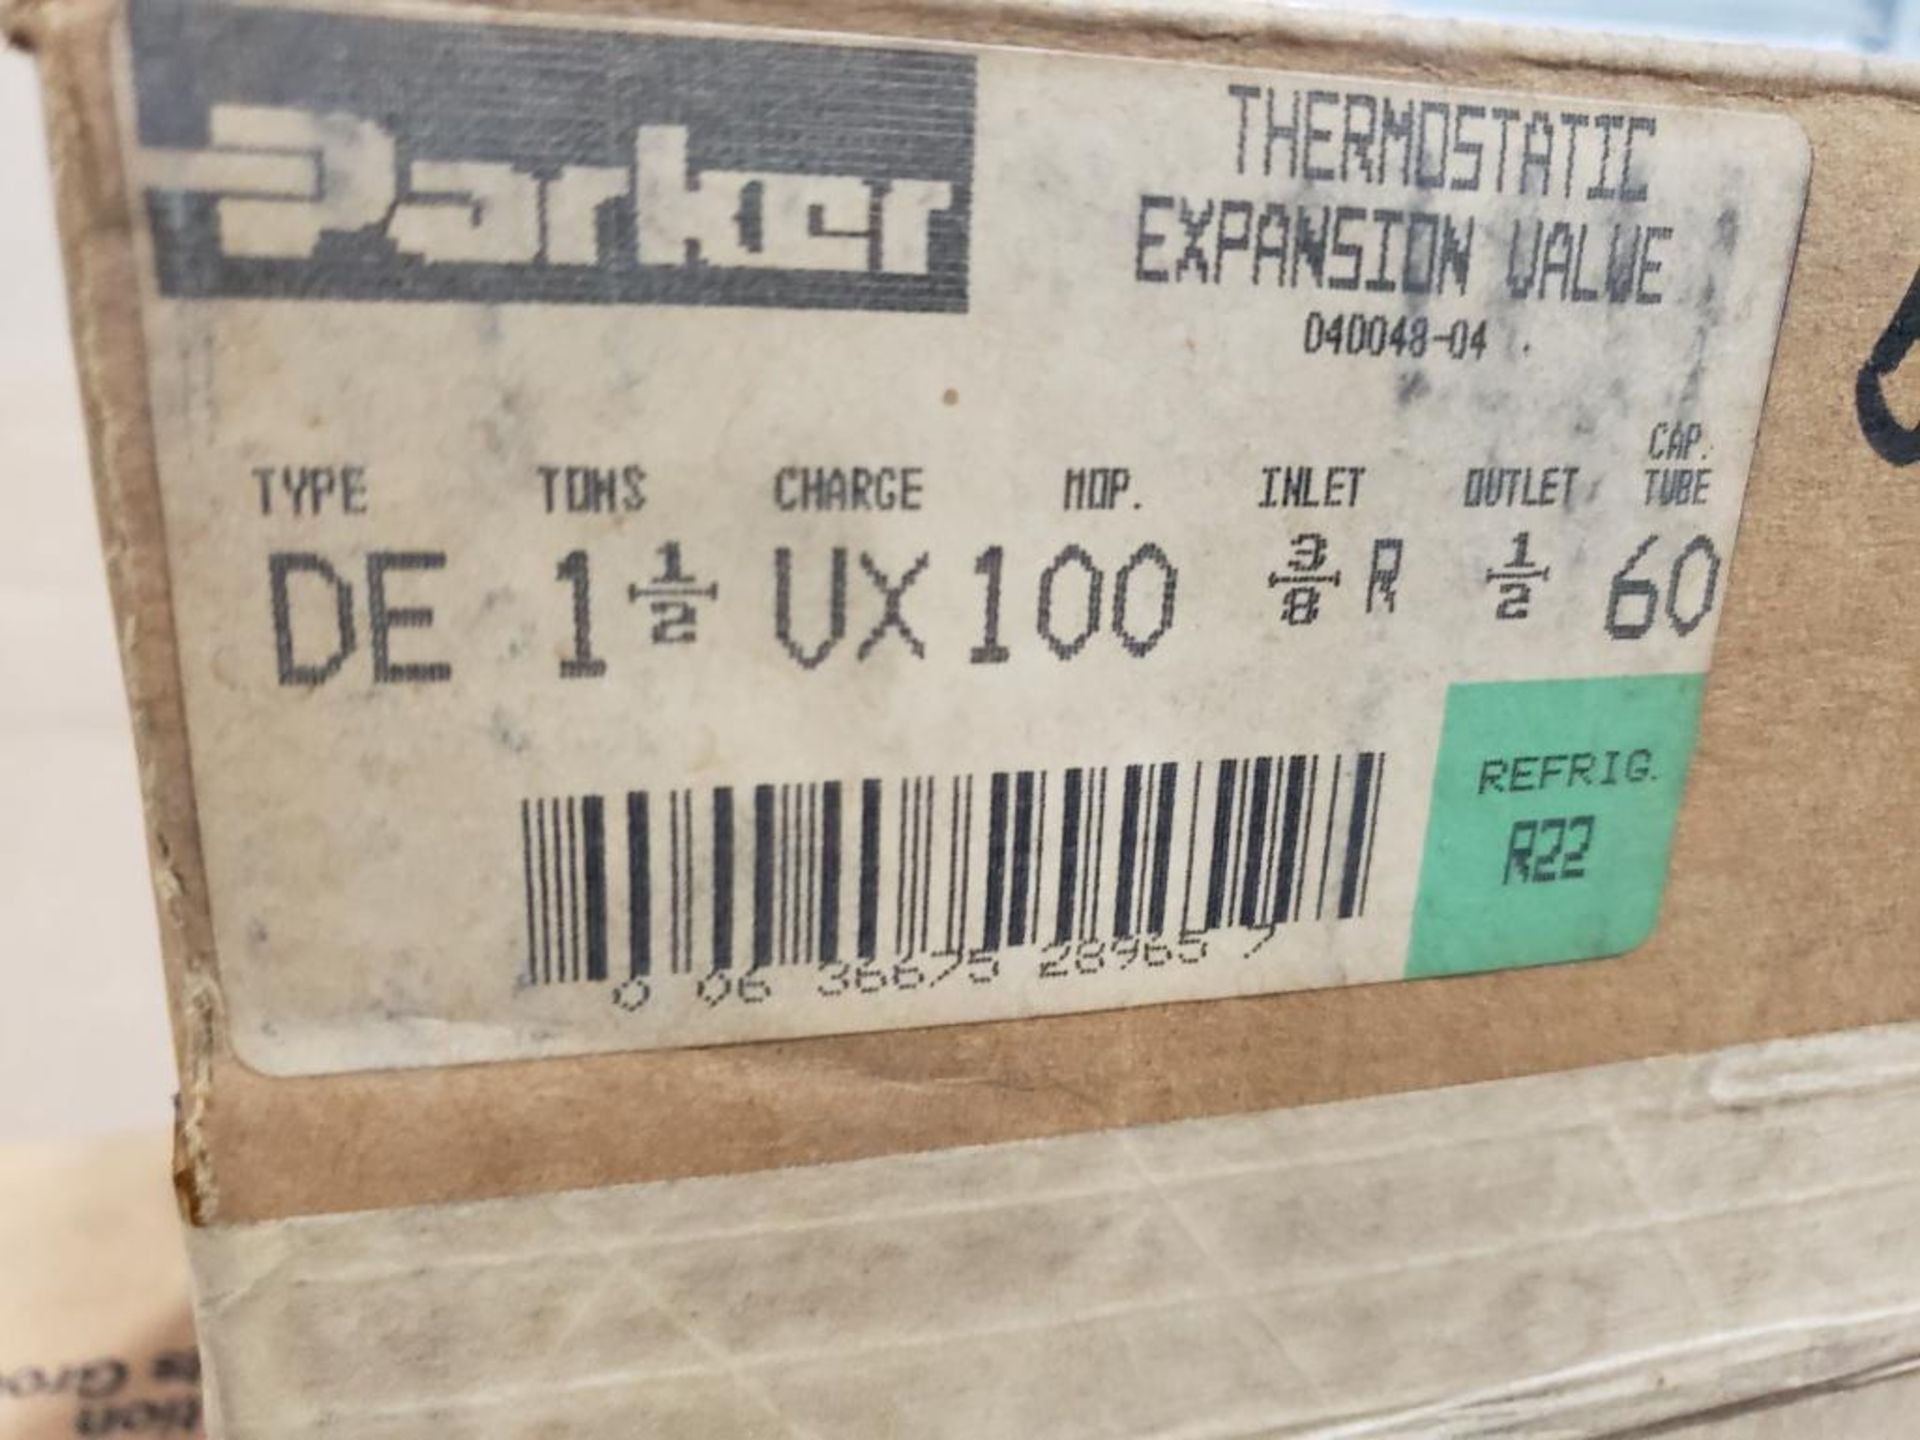 Qty 36 - Parker thermostatic expansion valve. Part number 040048-04. - Image 2 of 3